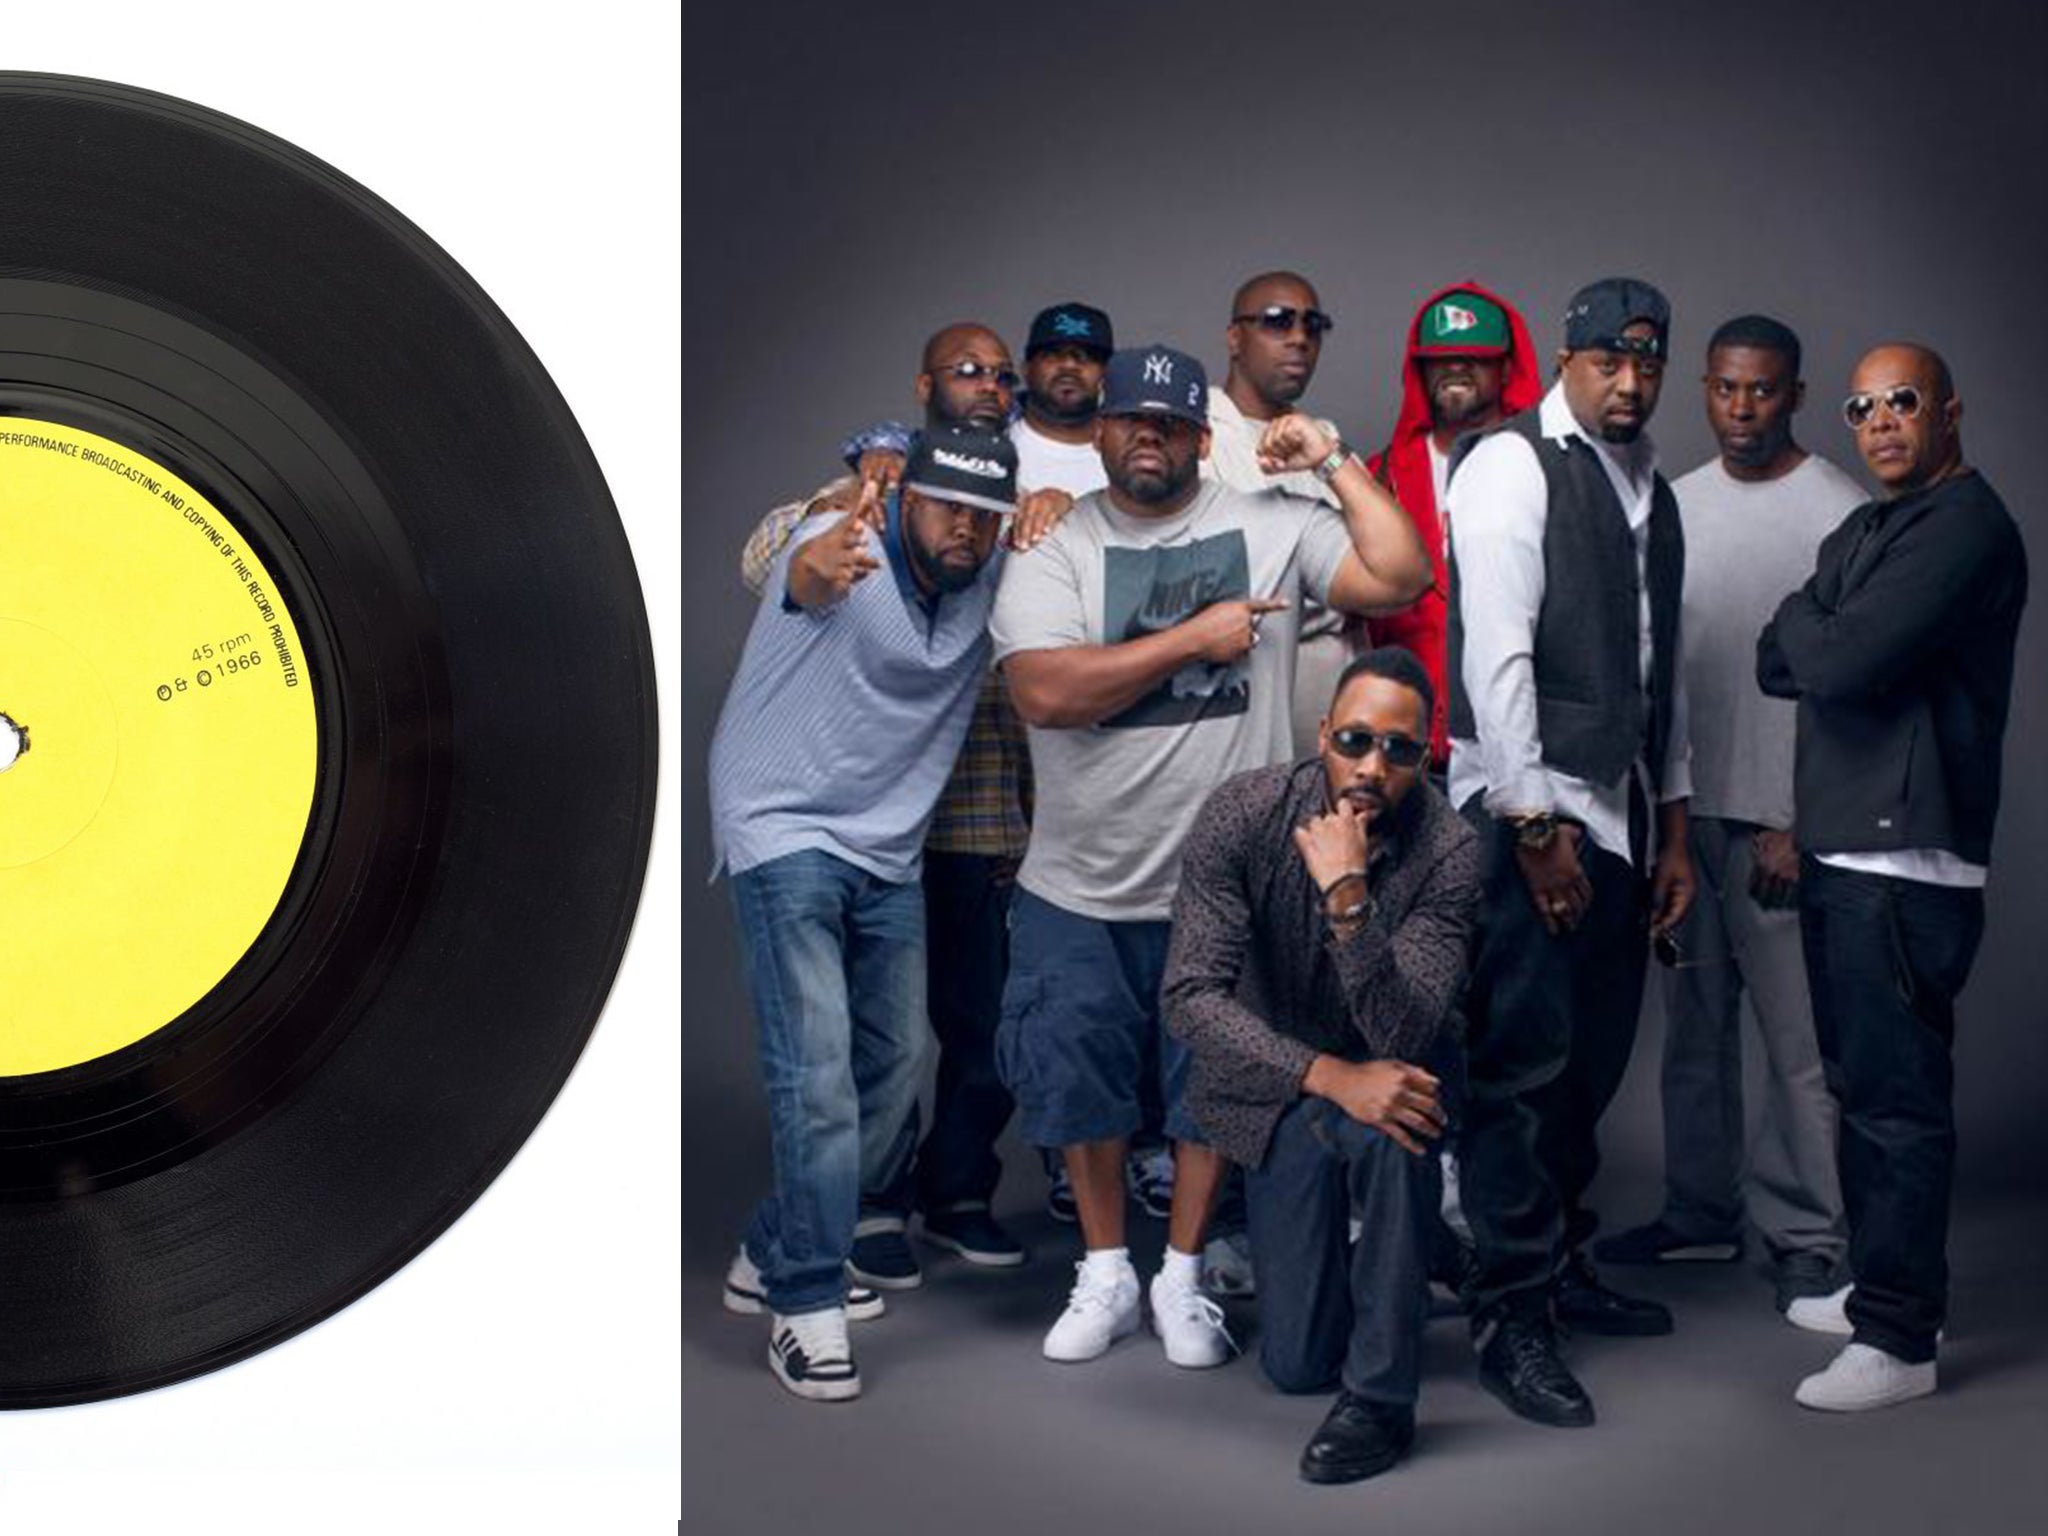 The Wu-Tang Clan will sell only one copy of their album Once Upon A Time In Shaolin